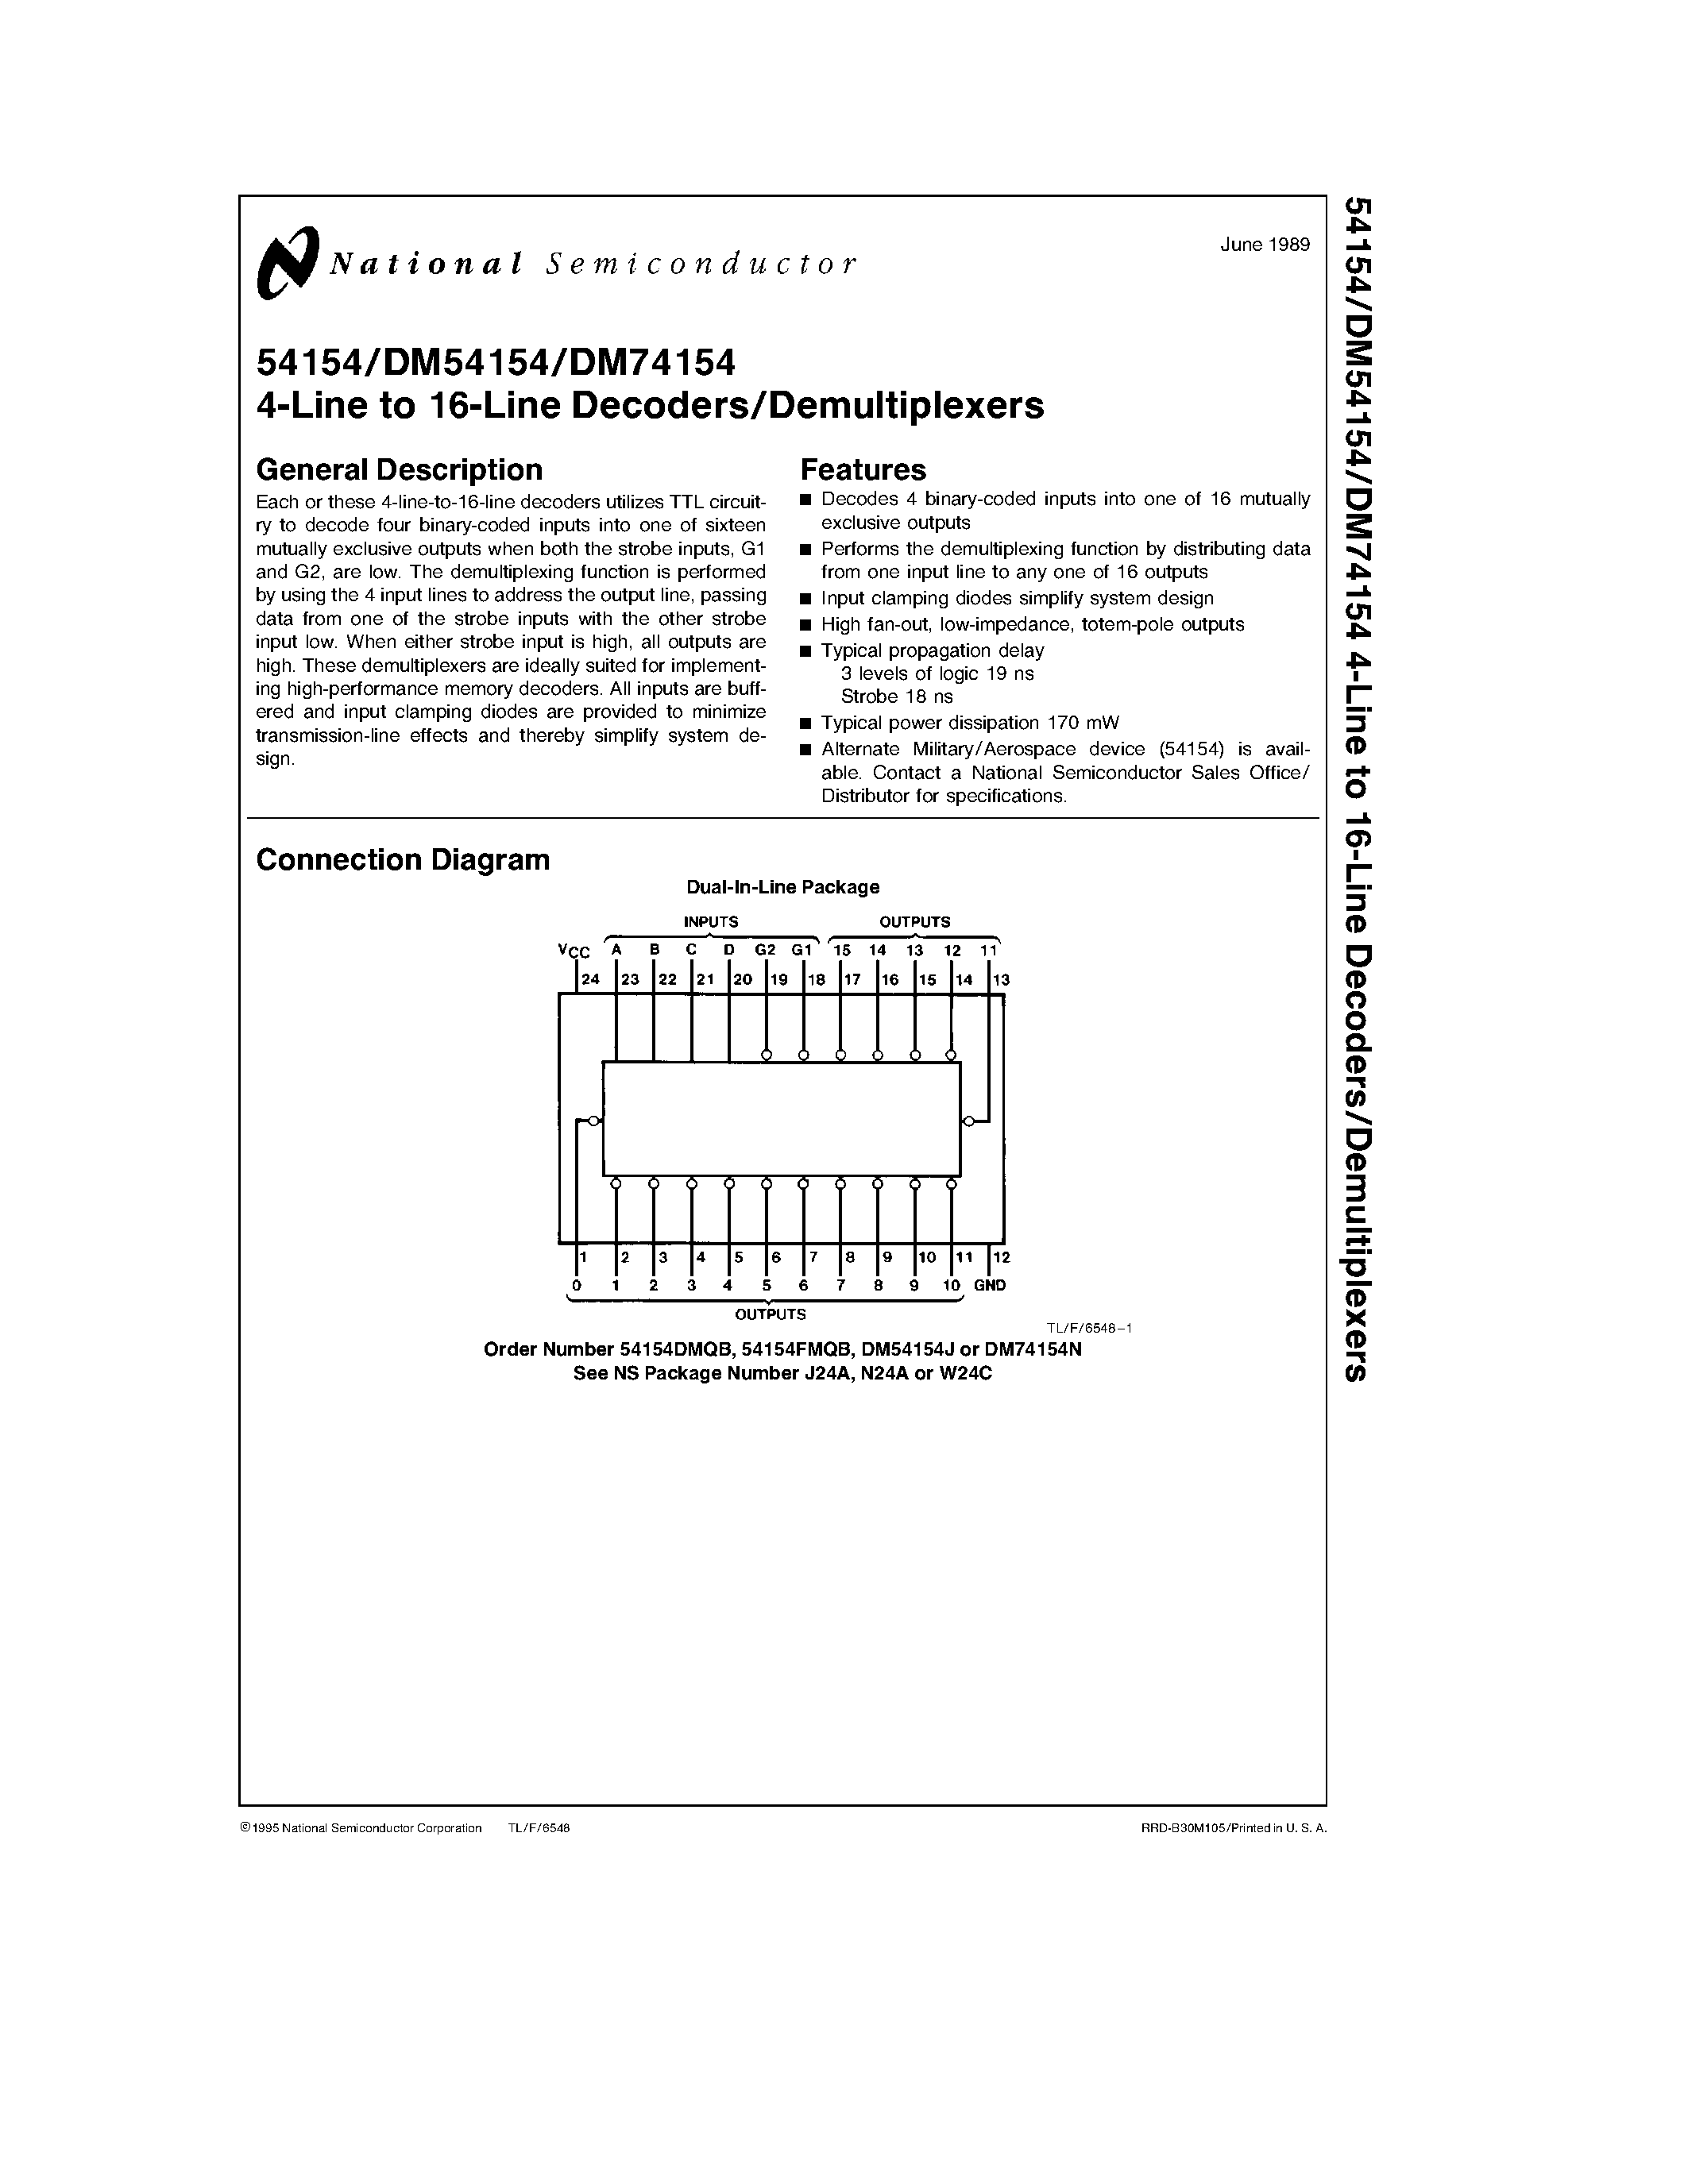 Datasheet 54154FMQB - 4-Line to 16-Line Decoders/Demultiplexers page 1